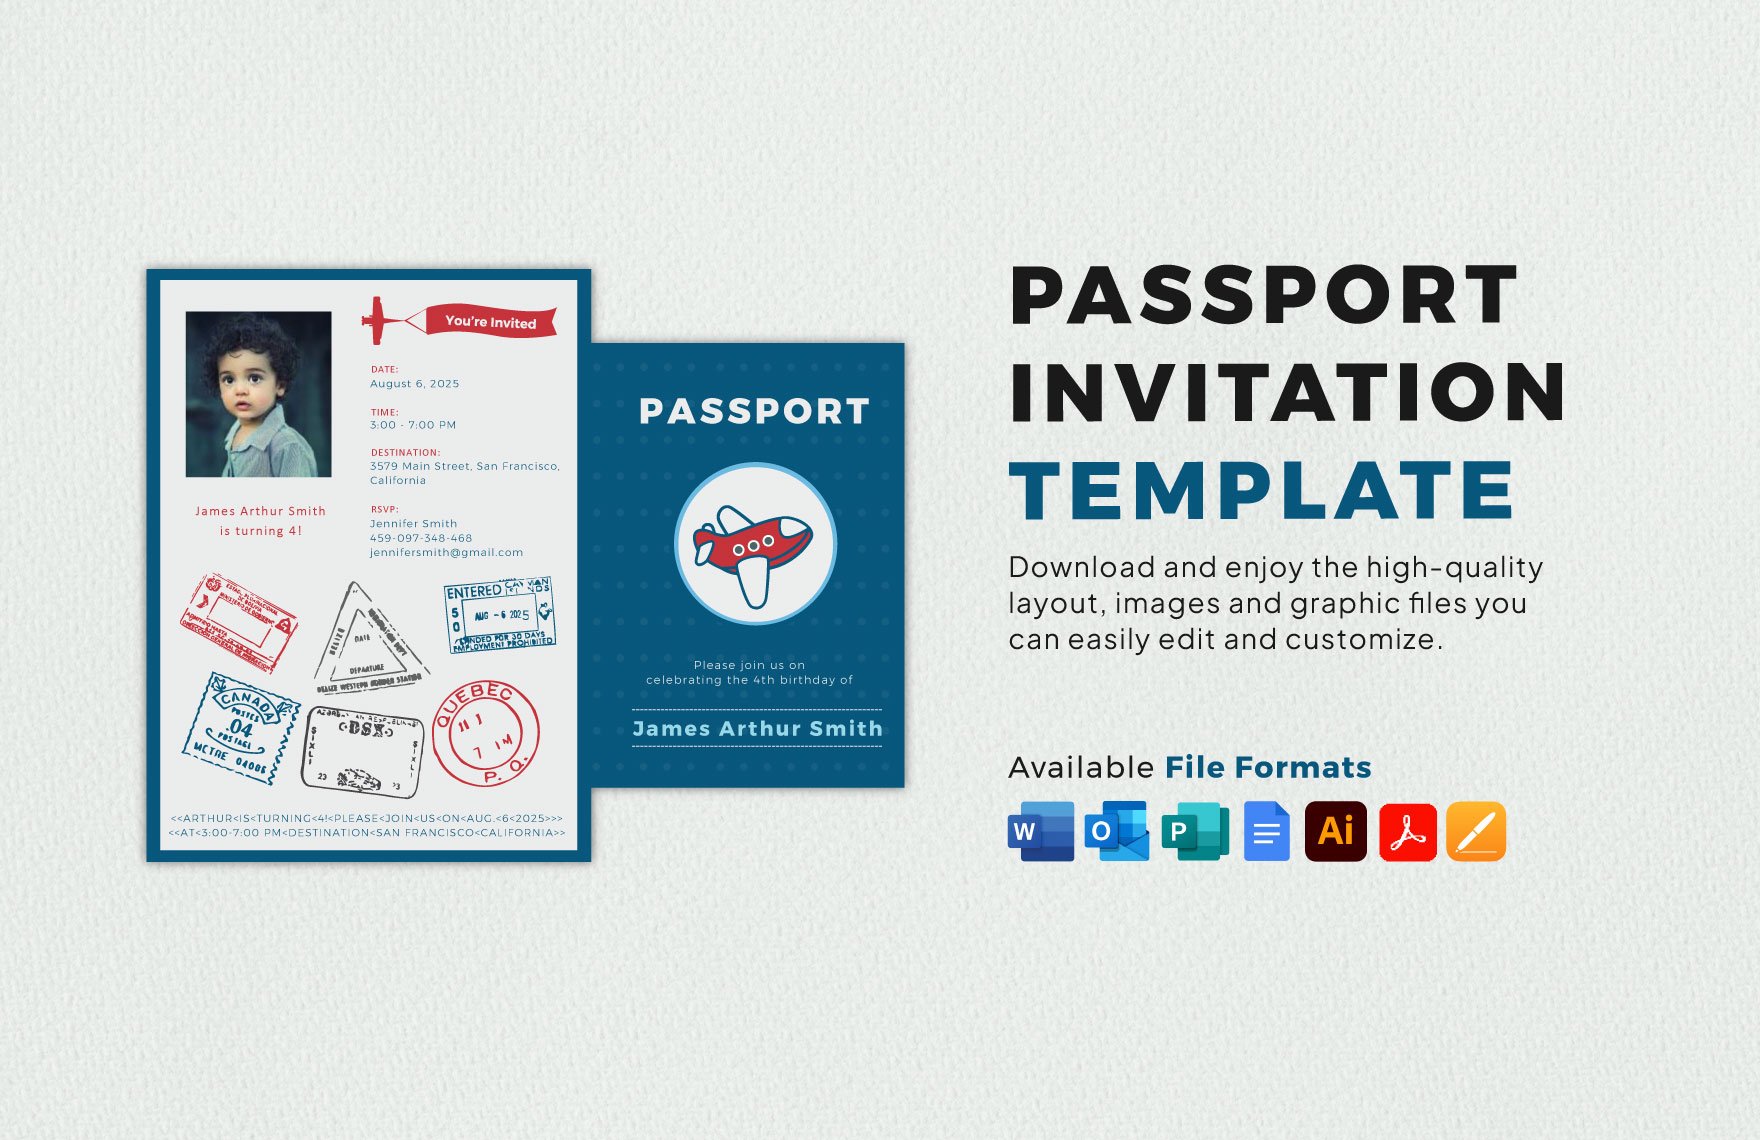 Passport Invitation Template in Word, Google Docs, PDF, Illustrator, Apple Pages, Publisher, Outlook